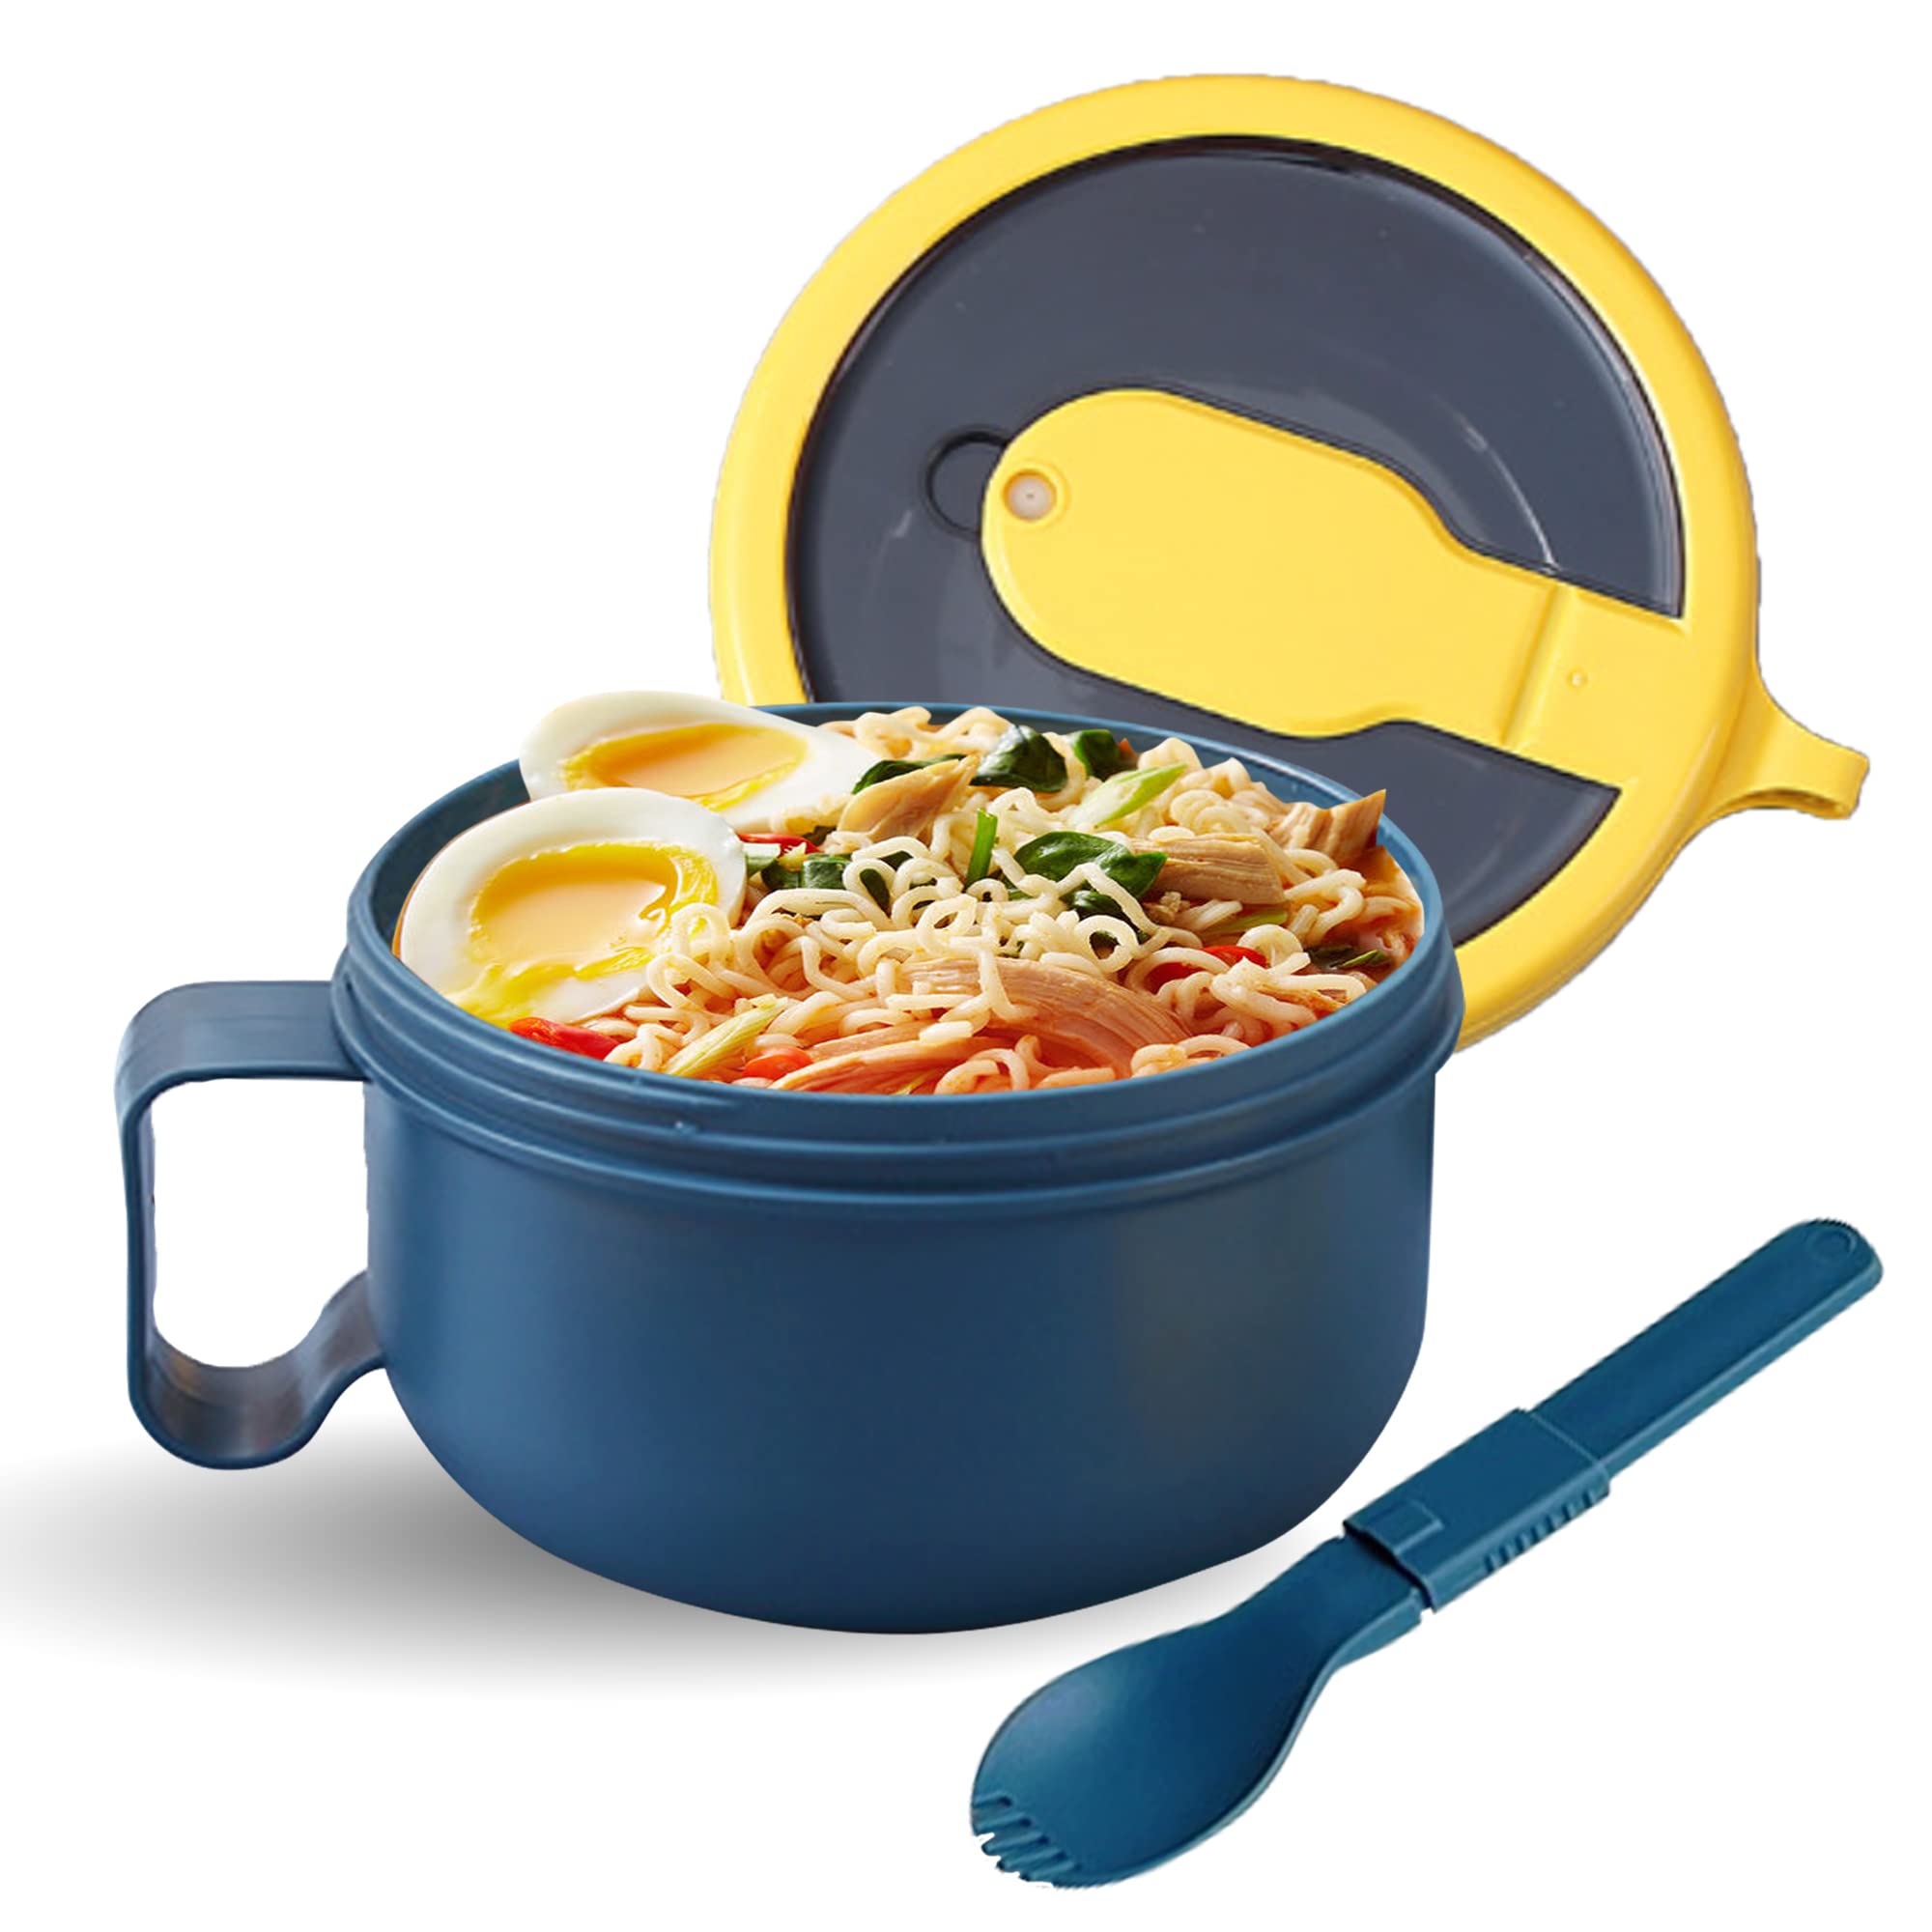 Dependable Industries Microwave Soup and Stew Maker Mug Noodles Steamer Ramen Oatmeal with Steam Vent and Splash Cover BPA-Free